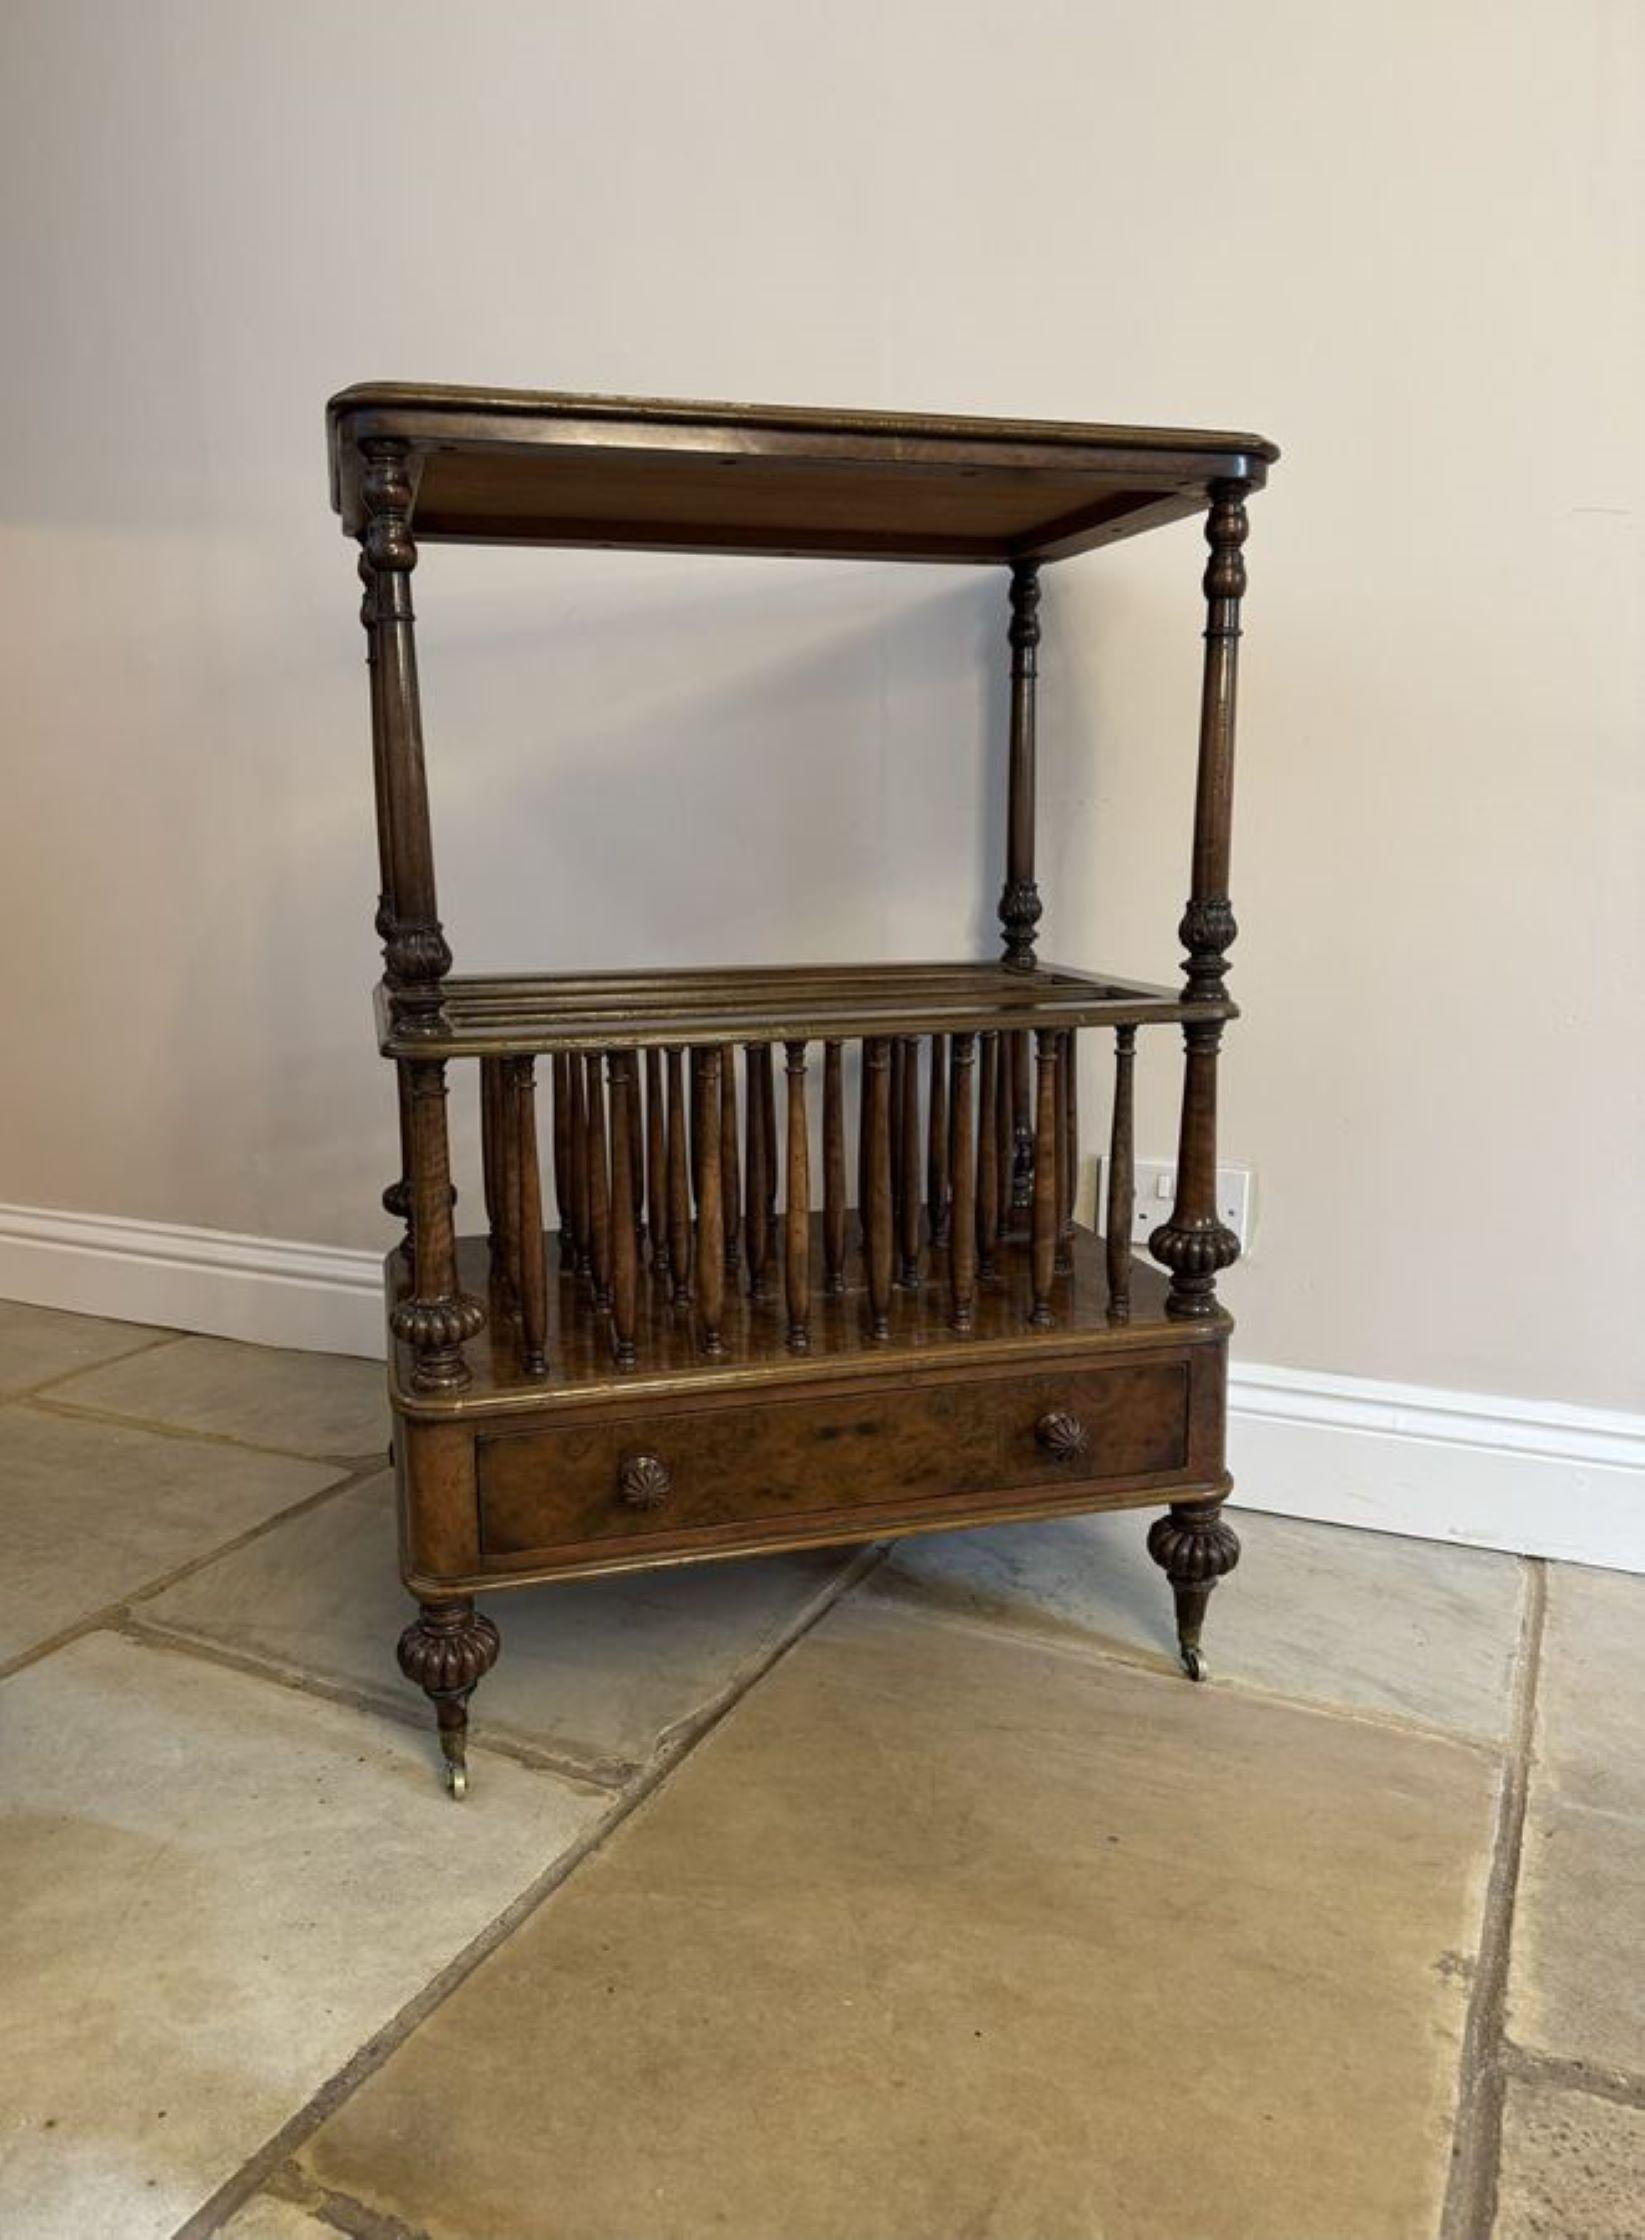 Superb quality antique Victorian freestanding burr walnut Canterbury whatnot, having a superb quality burr walnut top with a moulded edge, supported by turned carved walnut columns above three sections supported by turned columns, having a single